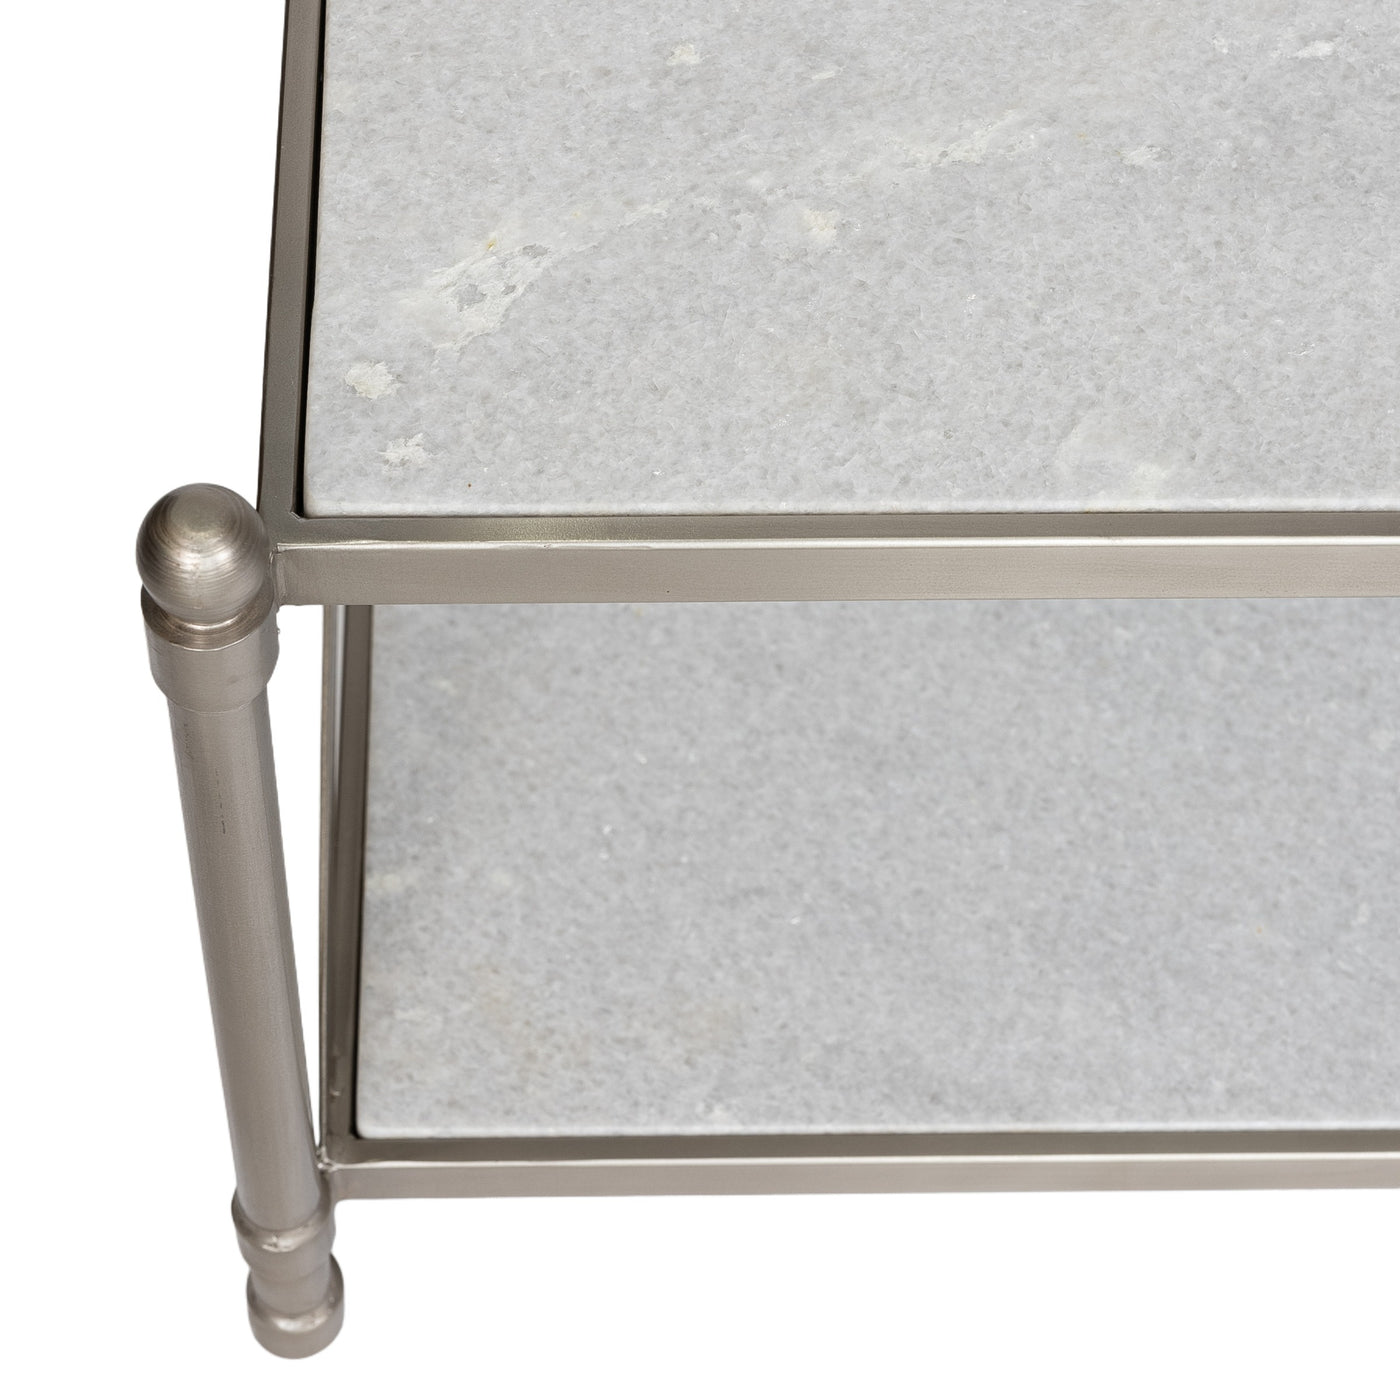 Silver & Marble Rectangular Coffee Table